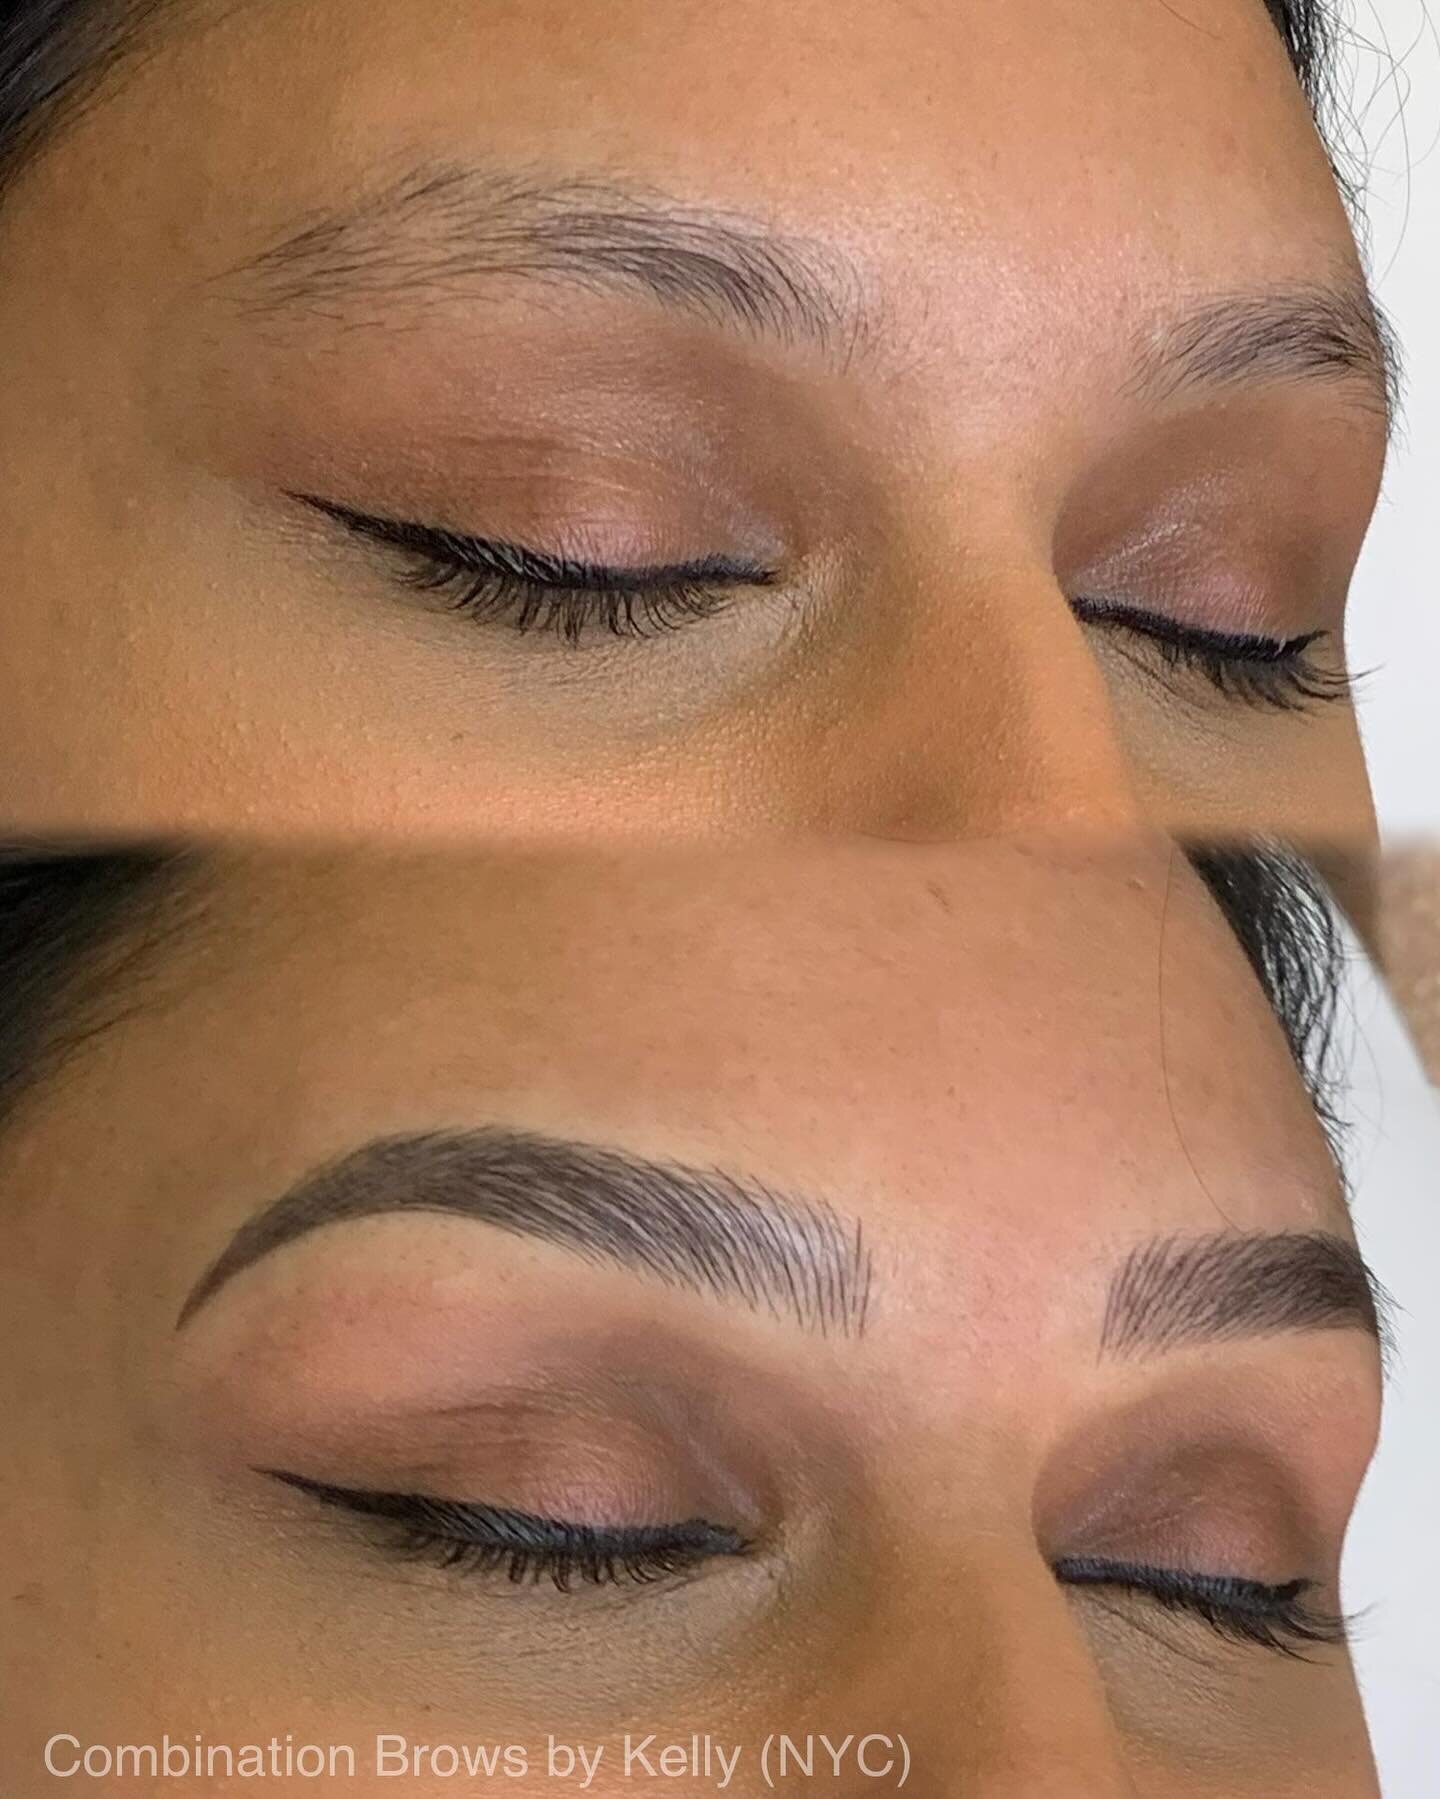 Elevate your brow game! These polished brows created with a combination of individual microbladed strokes, with subtle shading added to create definition. Get ready for the compliments 🥰
.
Combination&mdash; individual strokes + shading&mdash; by Ke